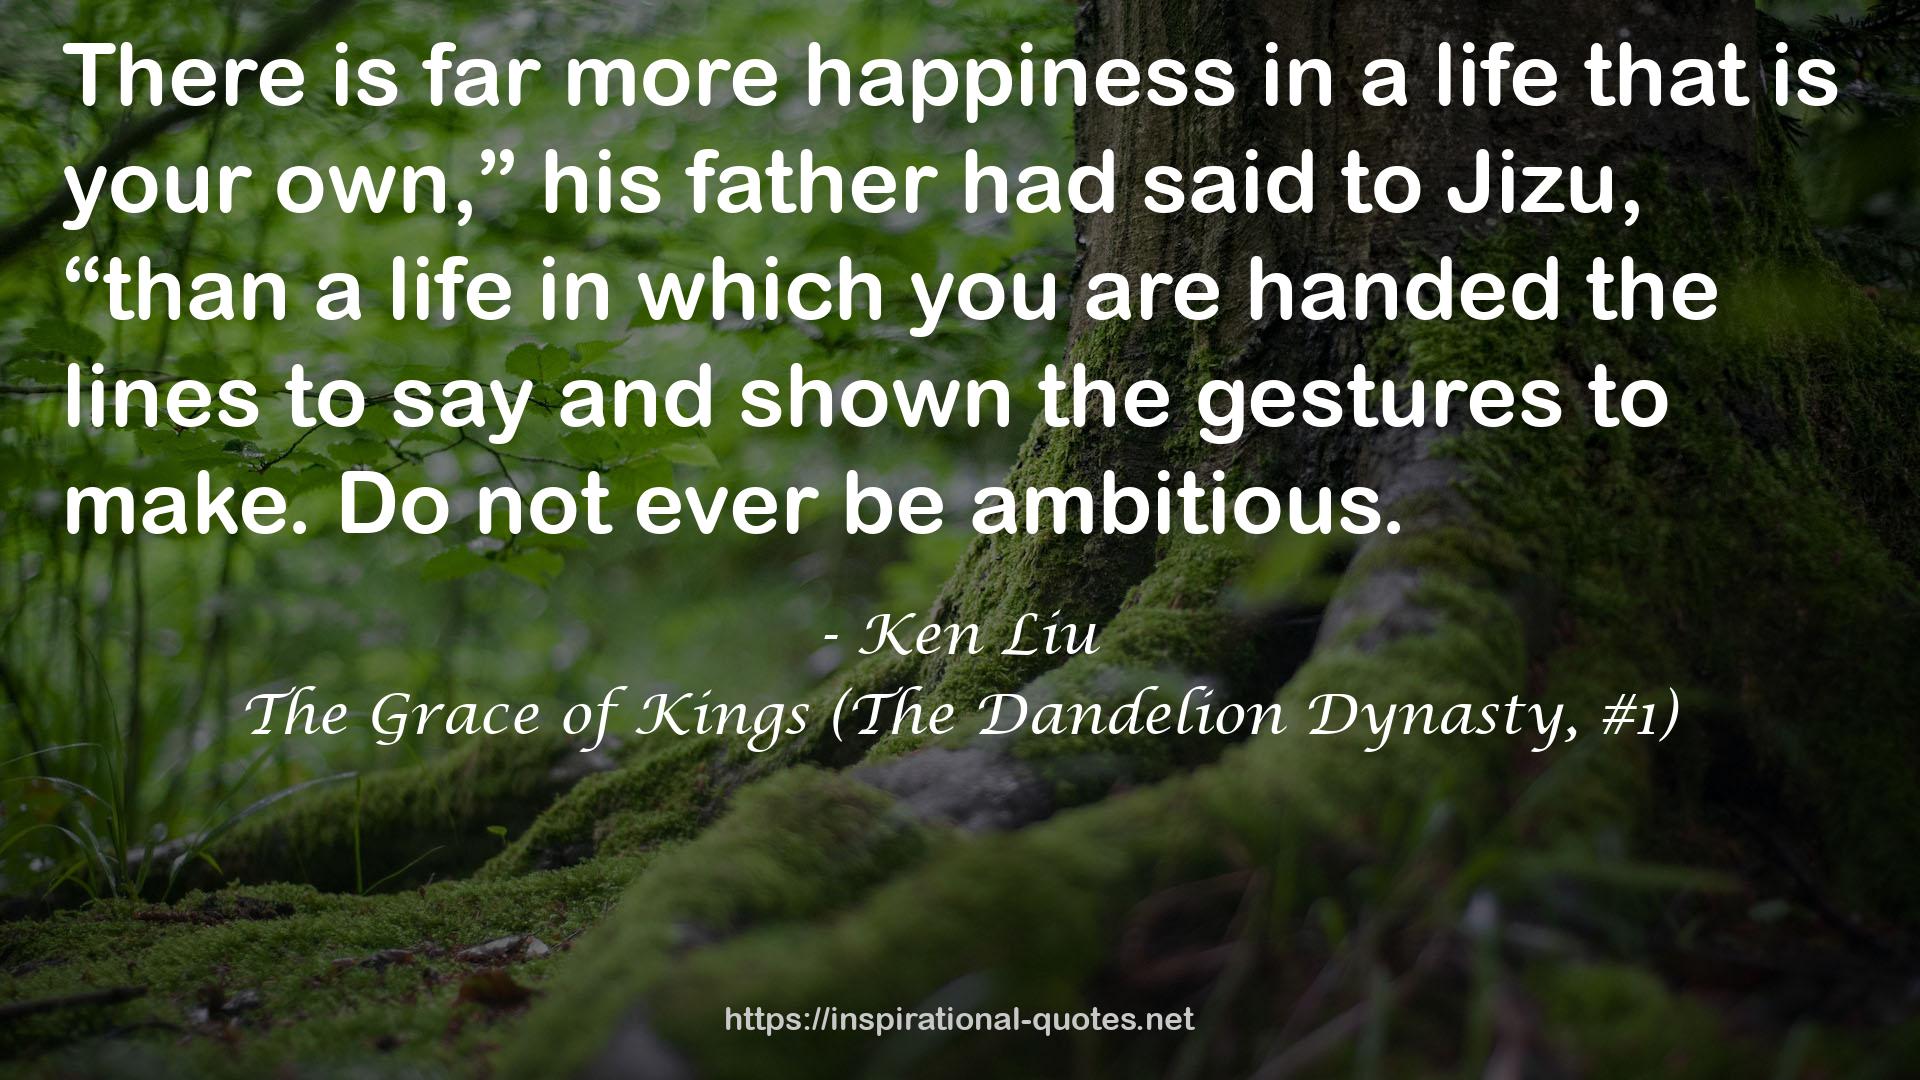 The Grace of Kings (The Dandelion Dynasty, #1) QUOTES